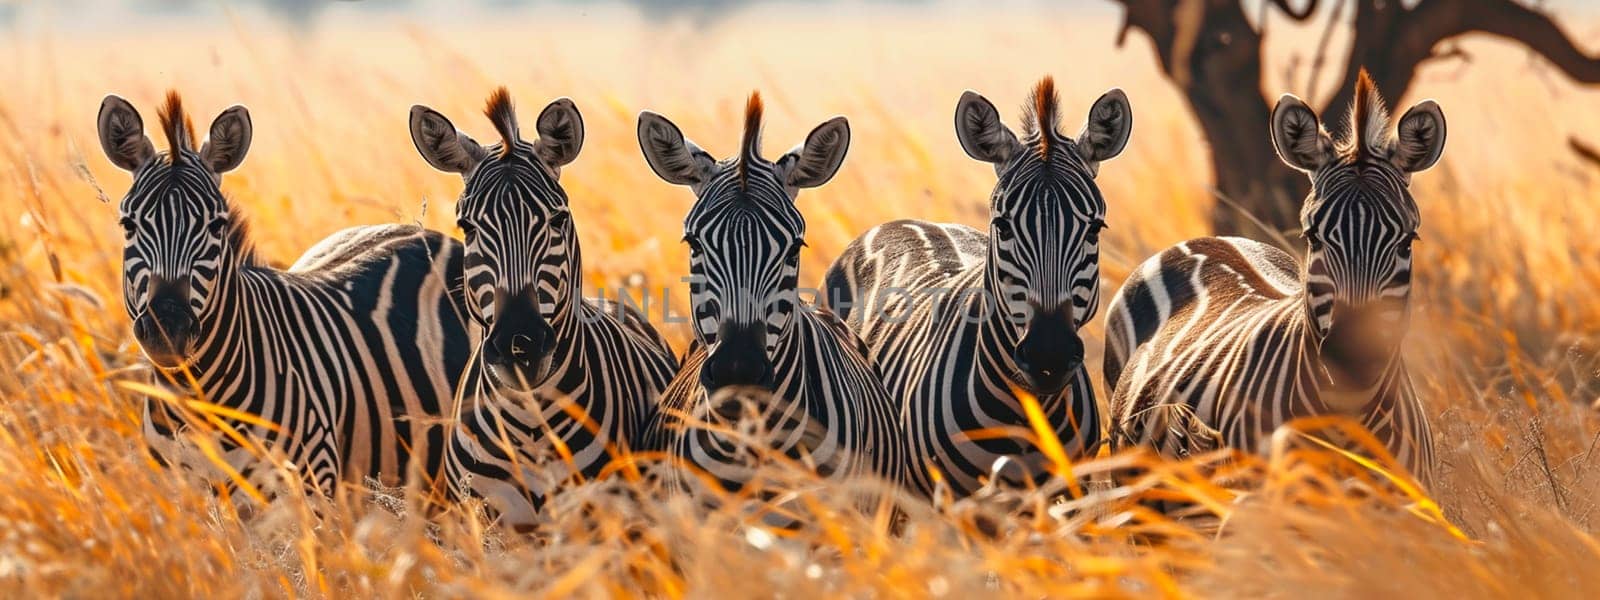 portrait of zebras in the wild. Selective focus. by mila1784